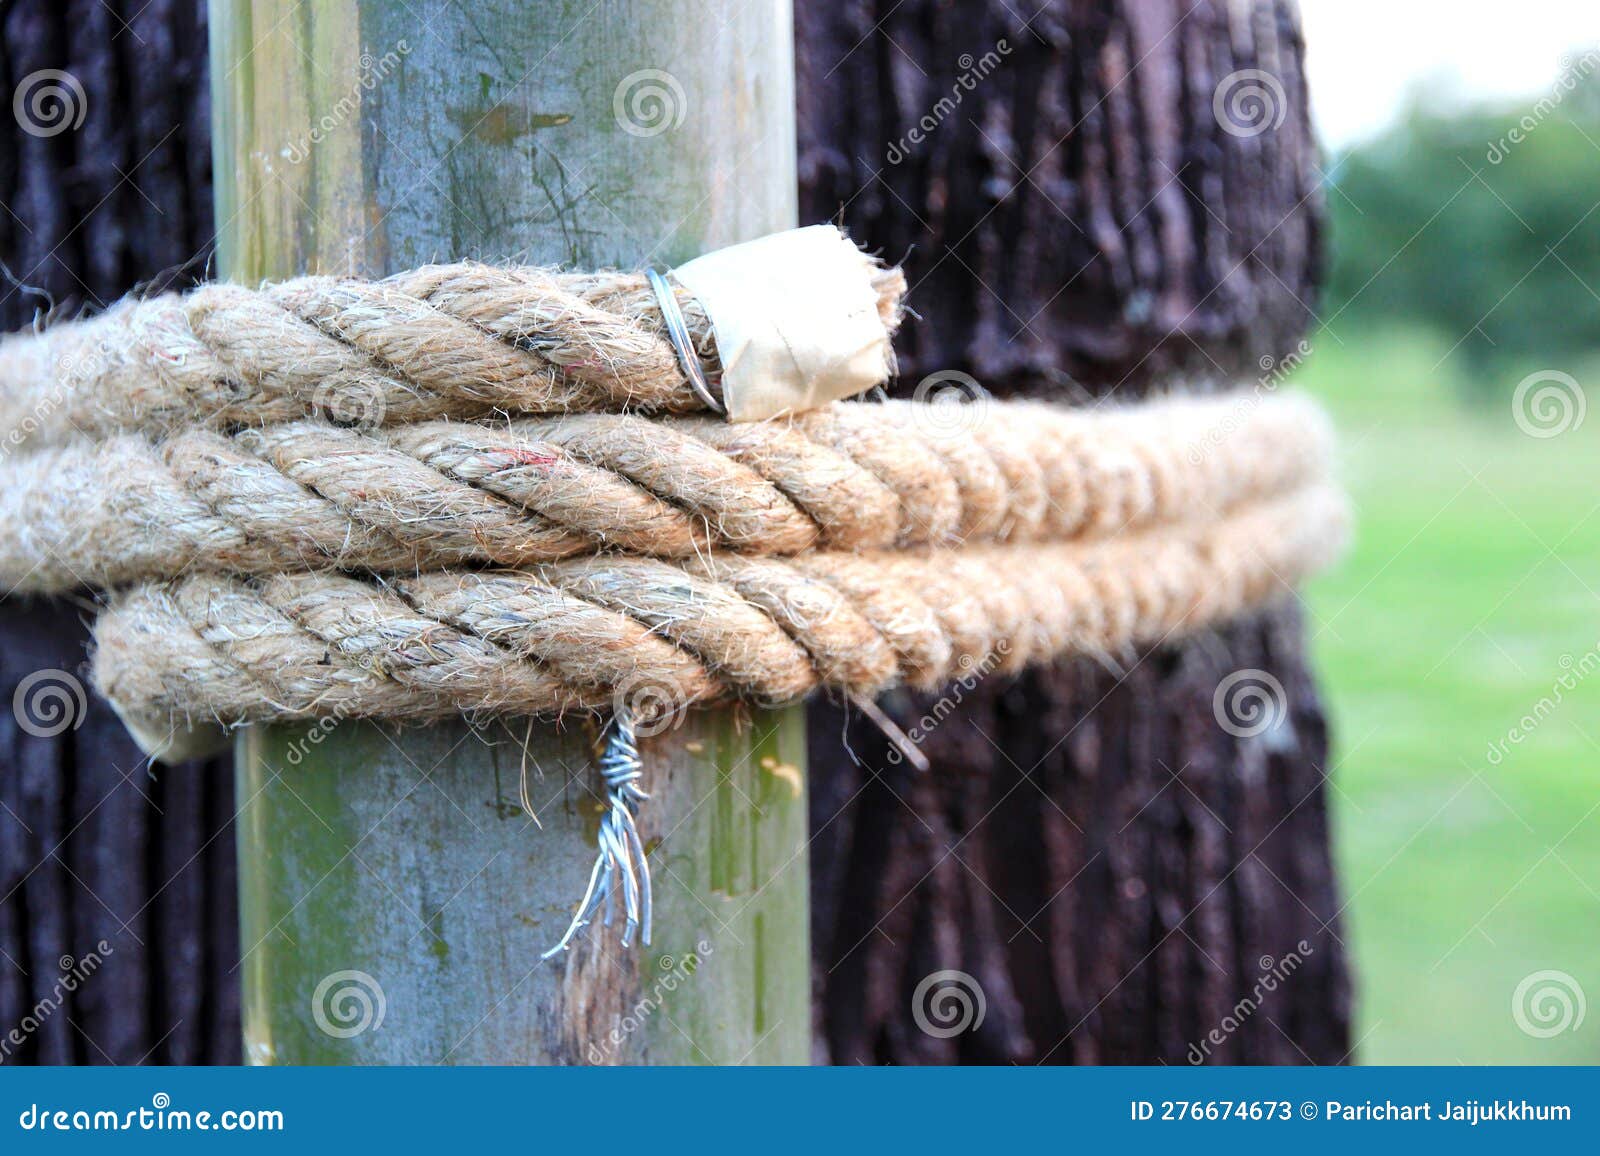 Tie a Large Rope in an Orderly Way To Hold Things Firmly Stock